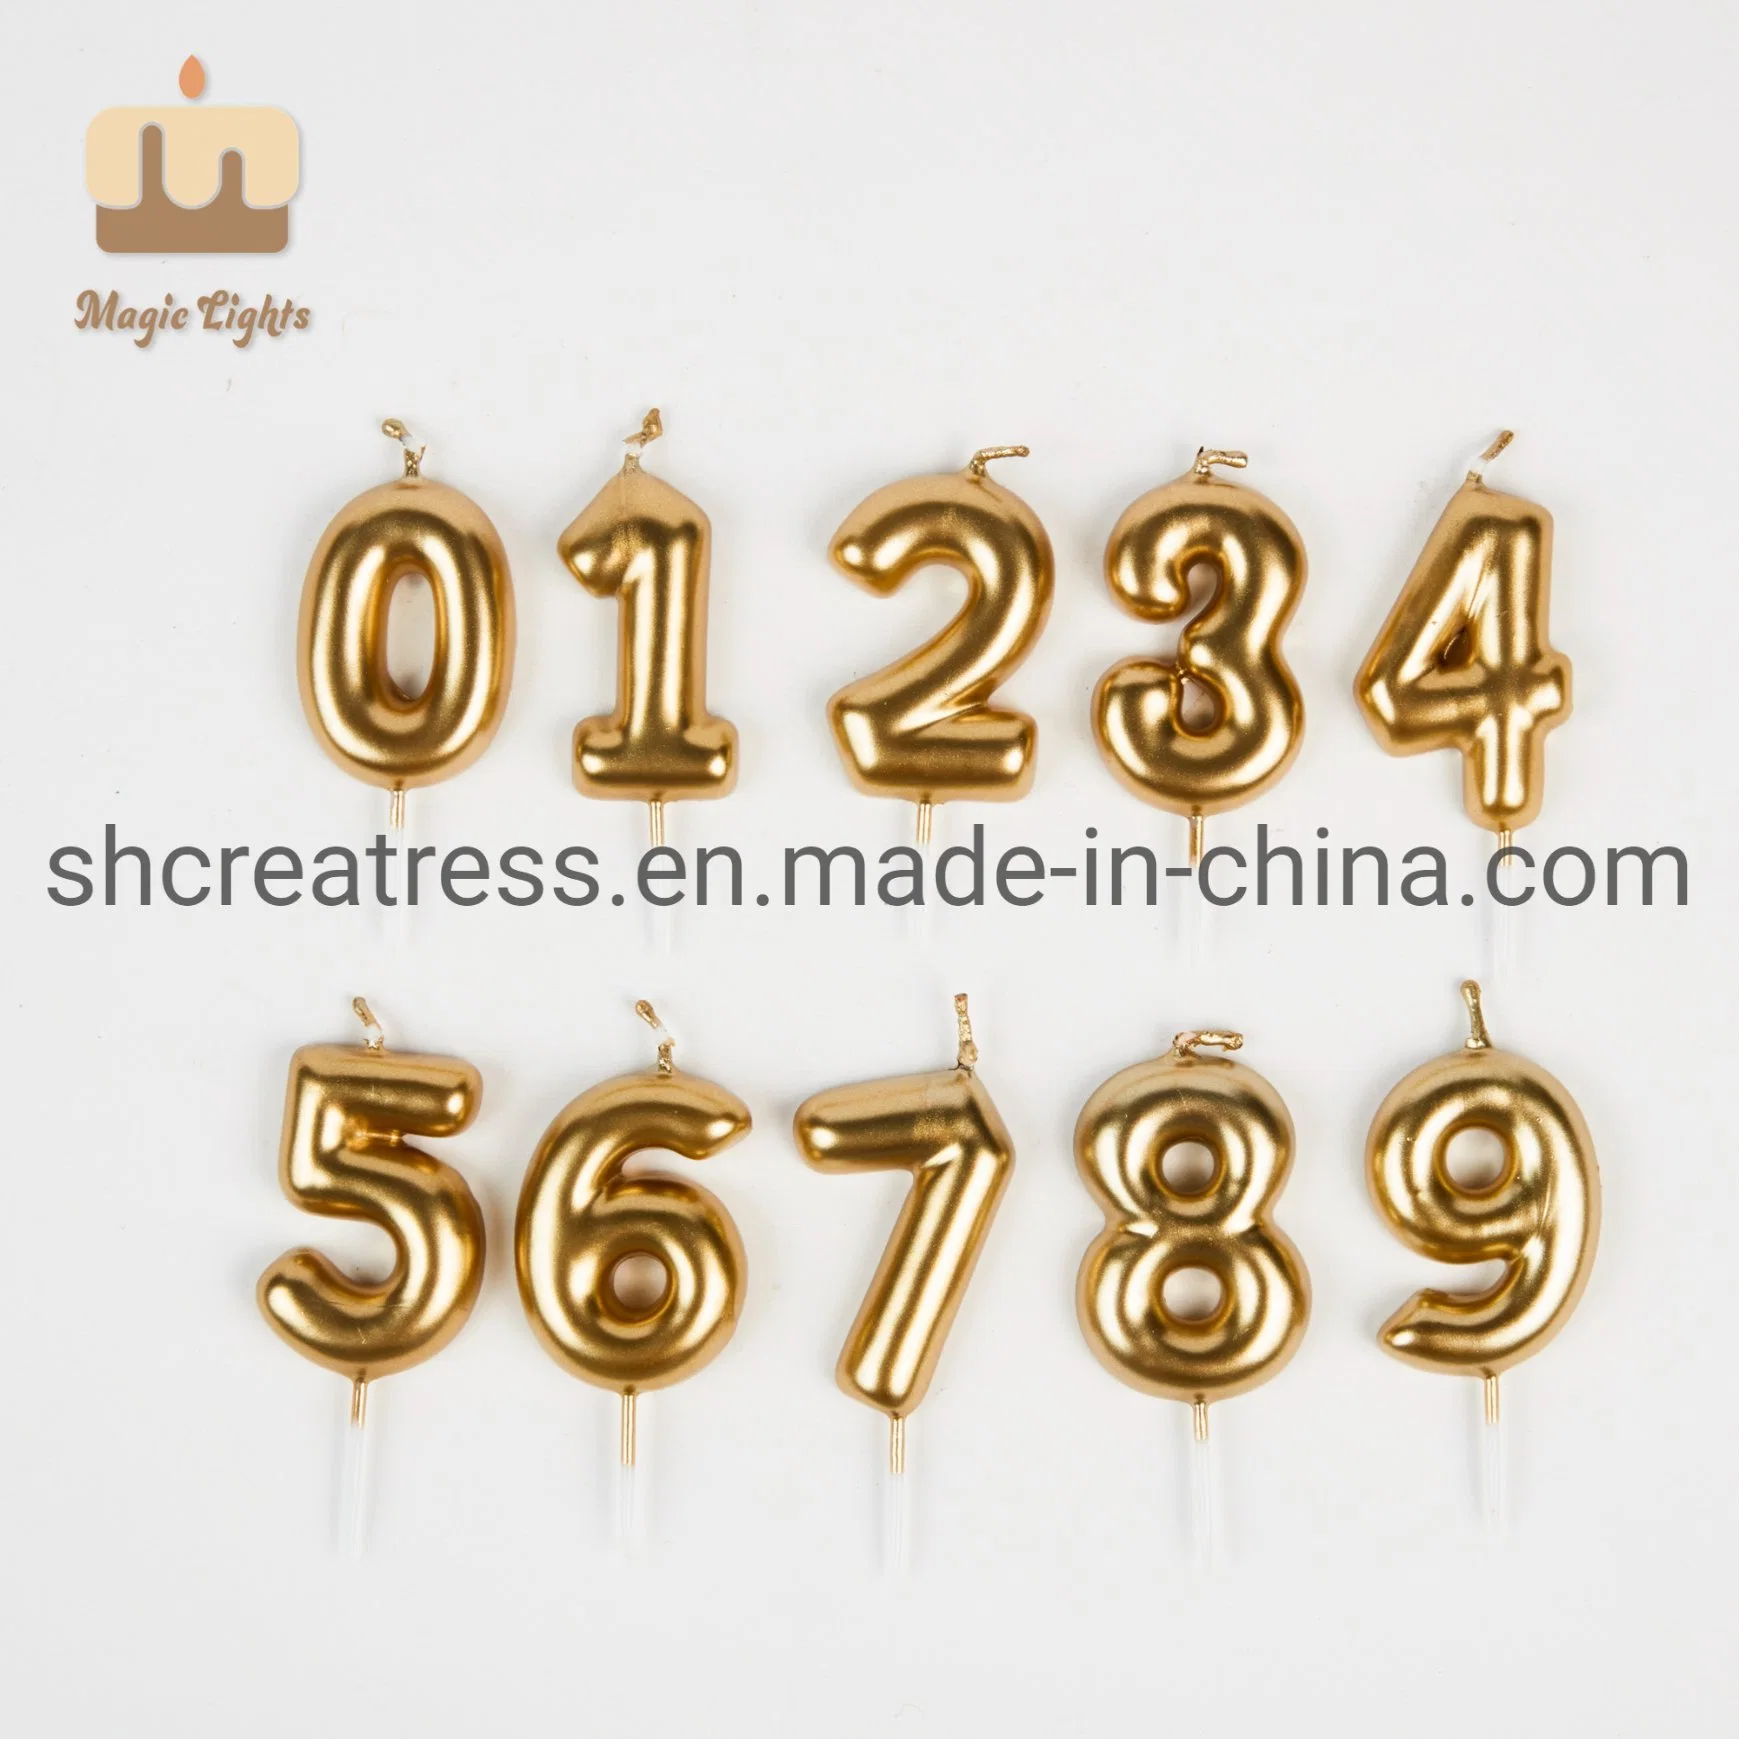 Reasonably Priced 100% Paraffin Wax Gold or Sliver Number Birthday Cake Candle